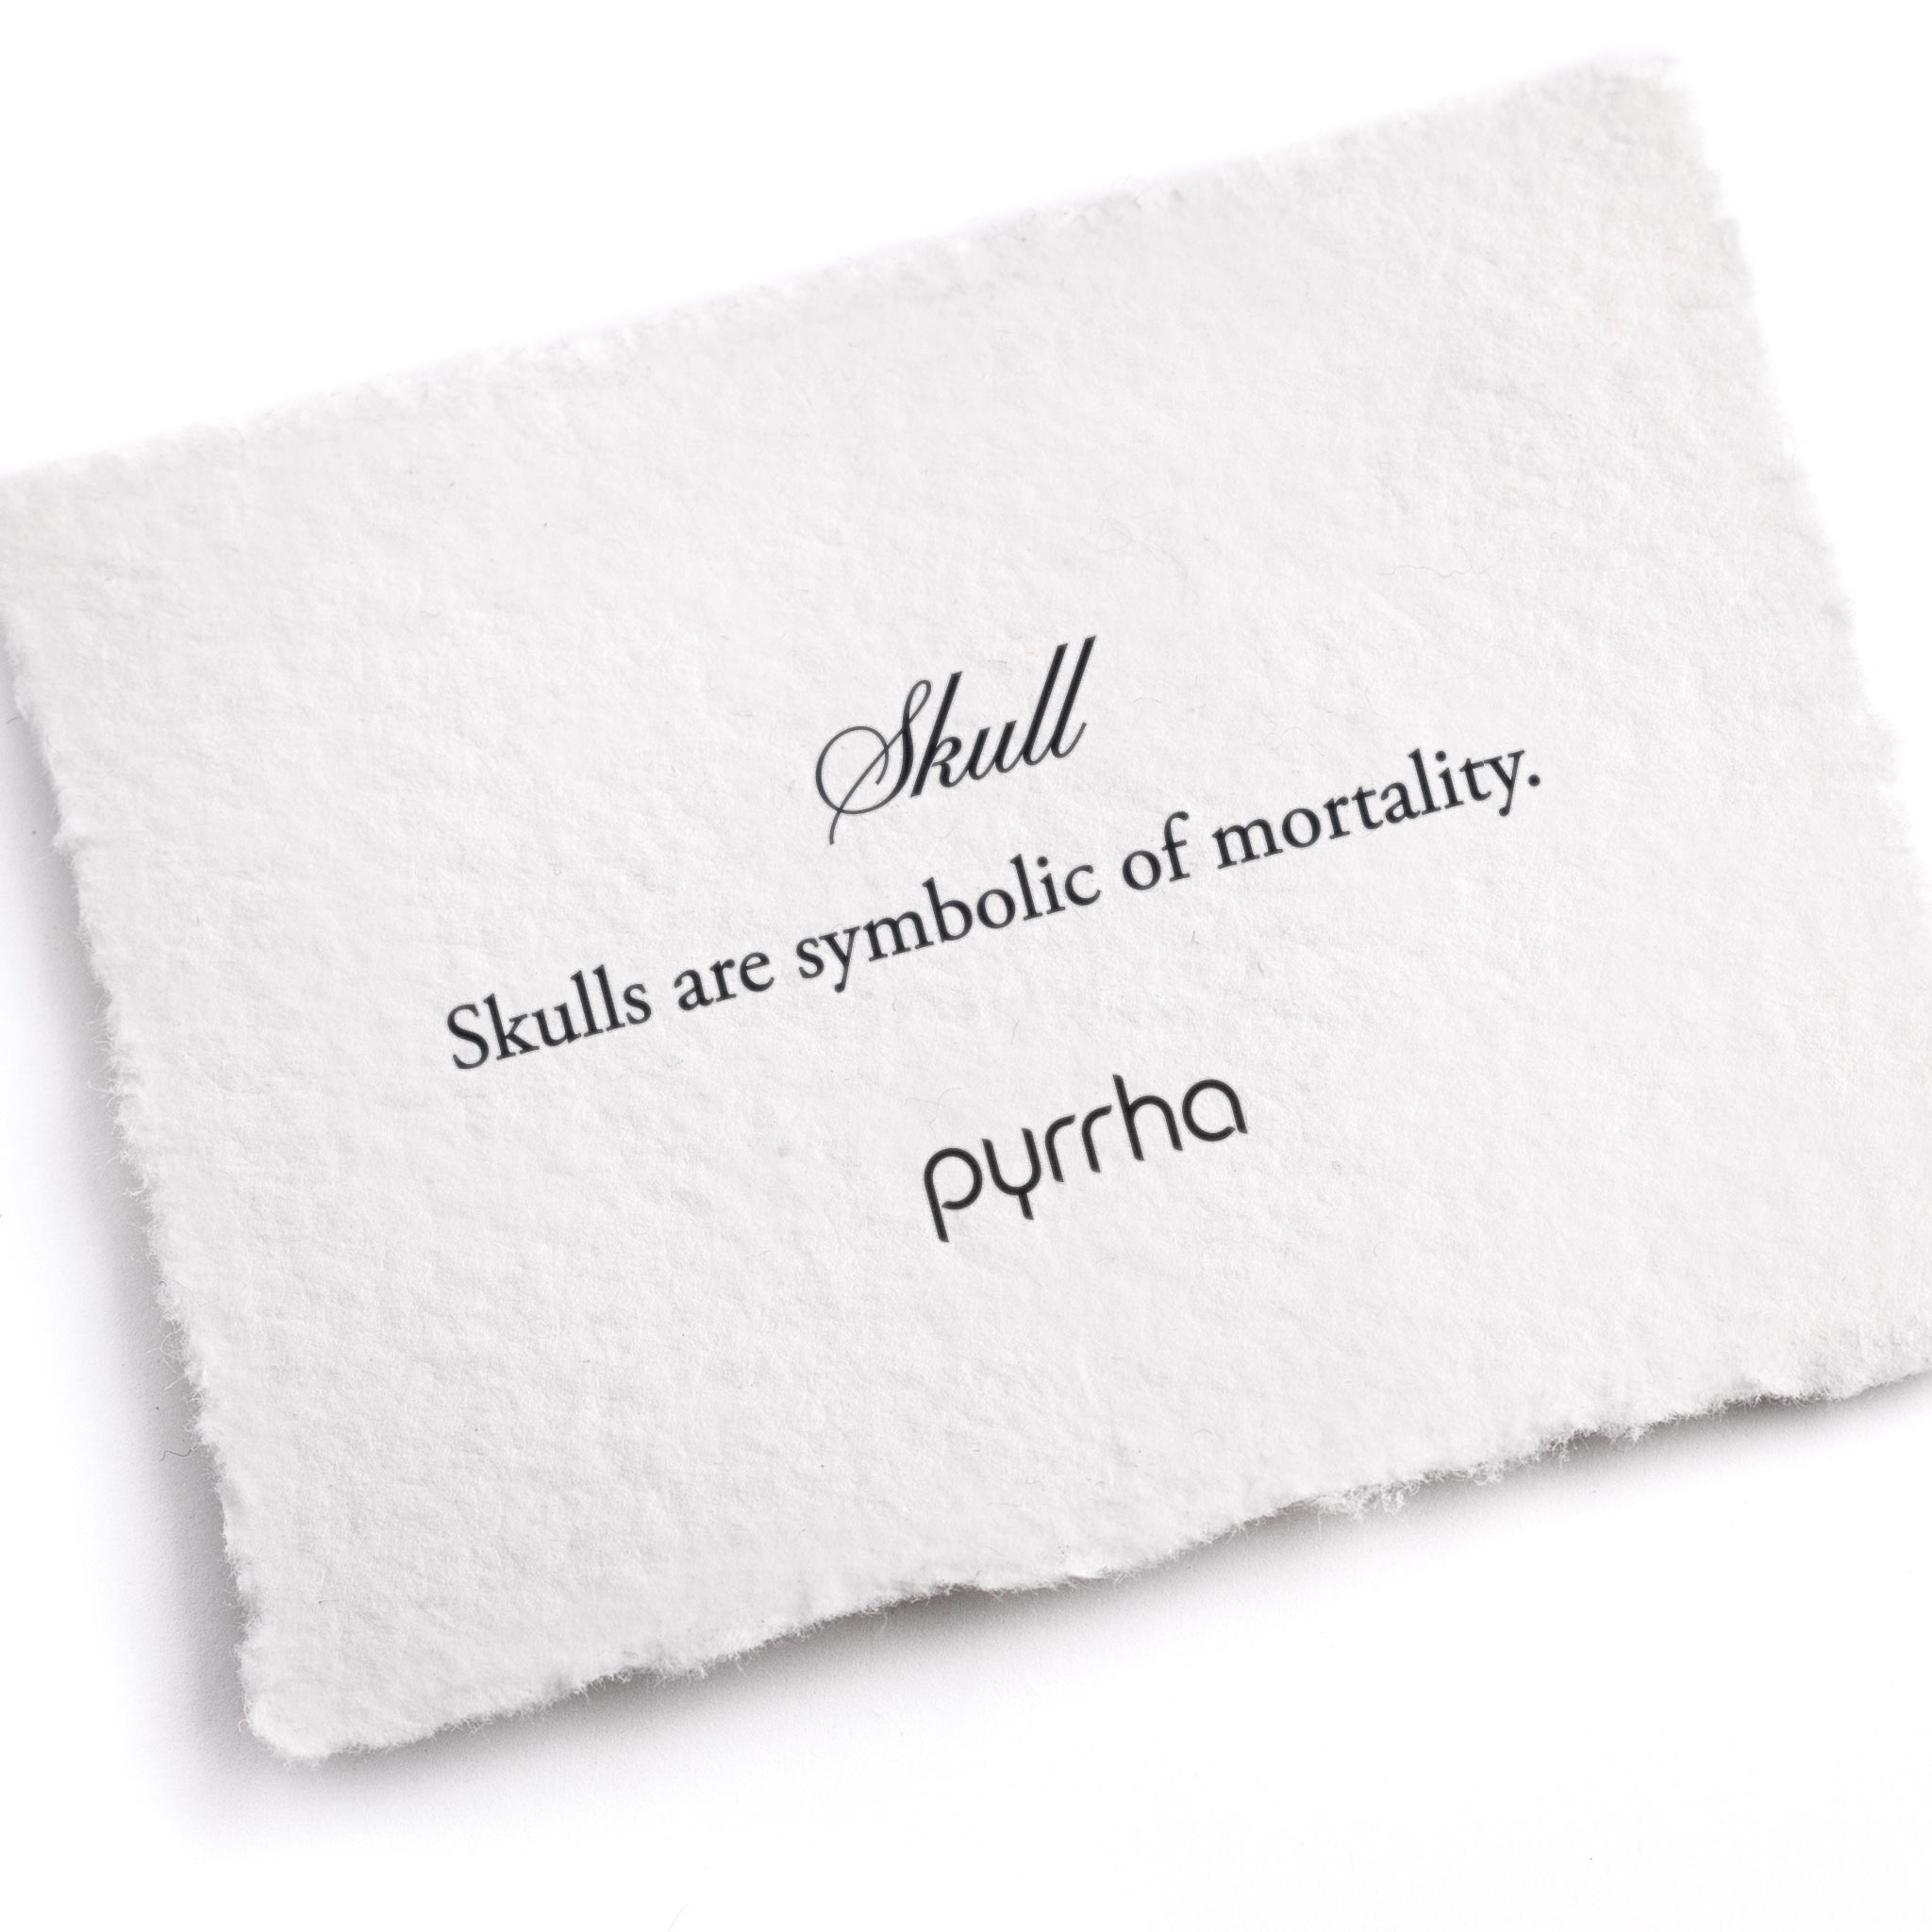 A handtorn cotton card describing the meaning for our Skull 14K Gold Symbol Charm Bracelet.